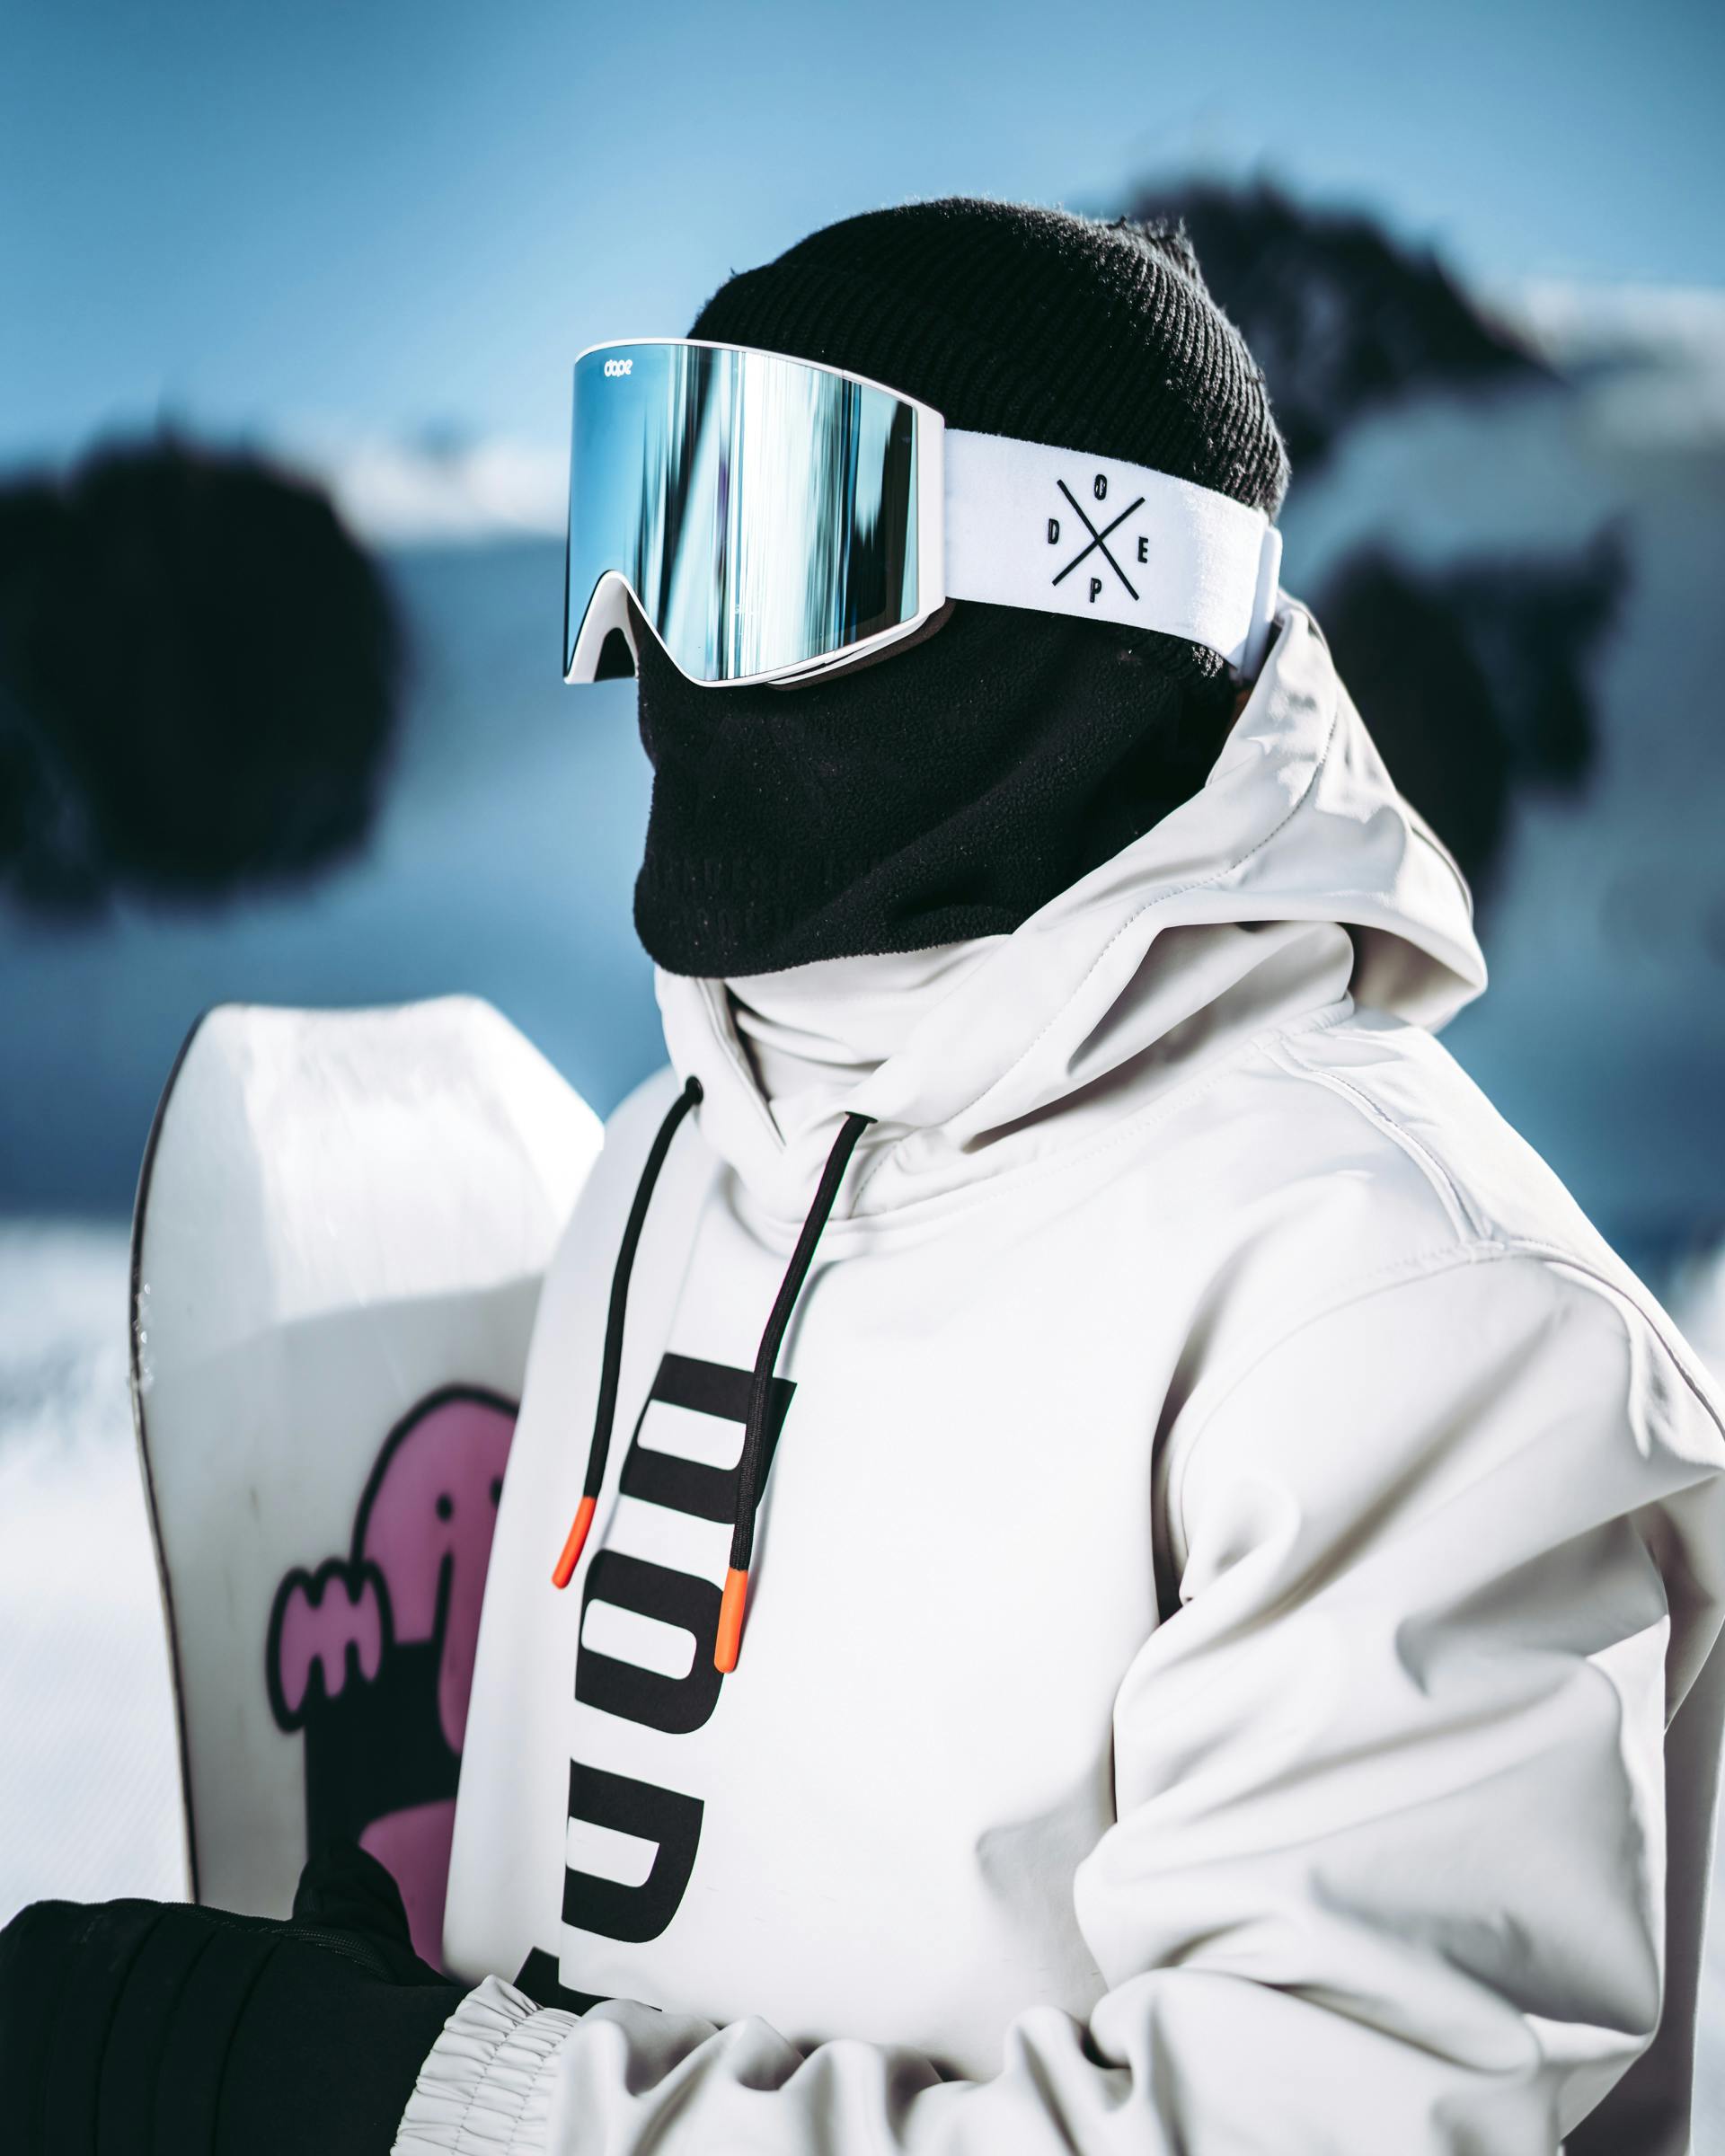 The commercialisation of snowboarding